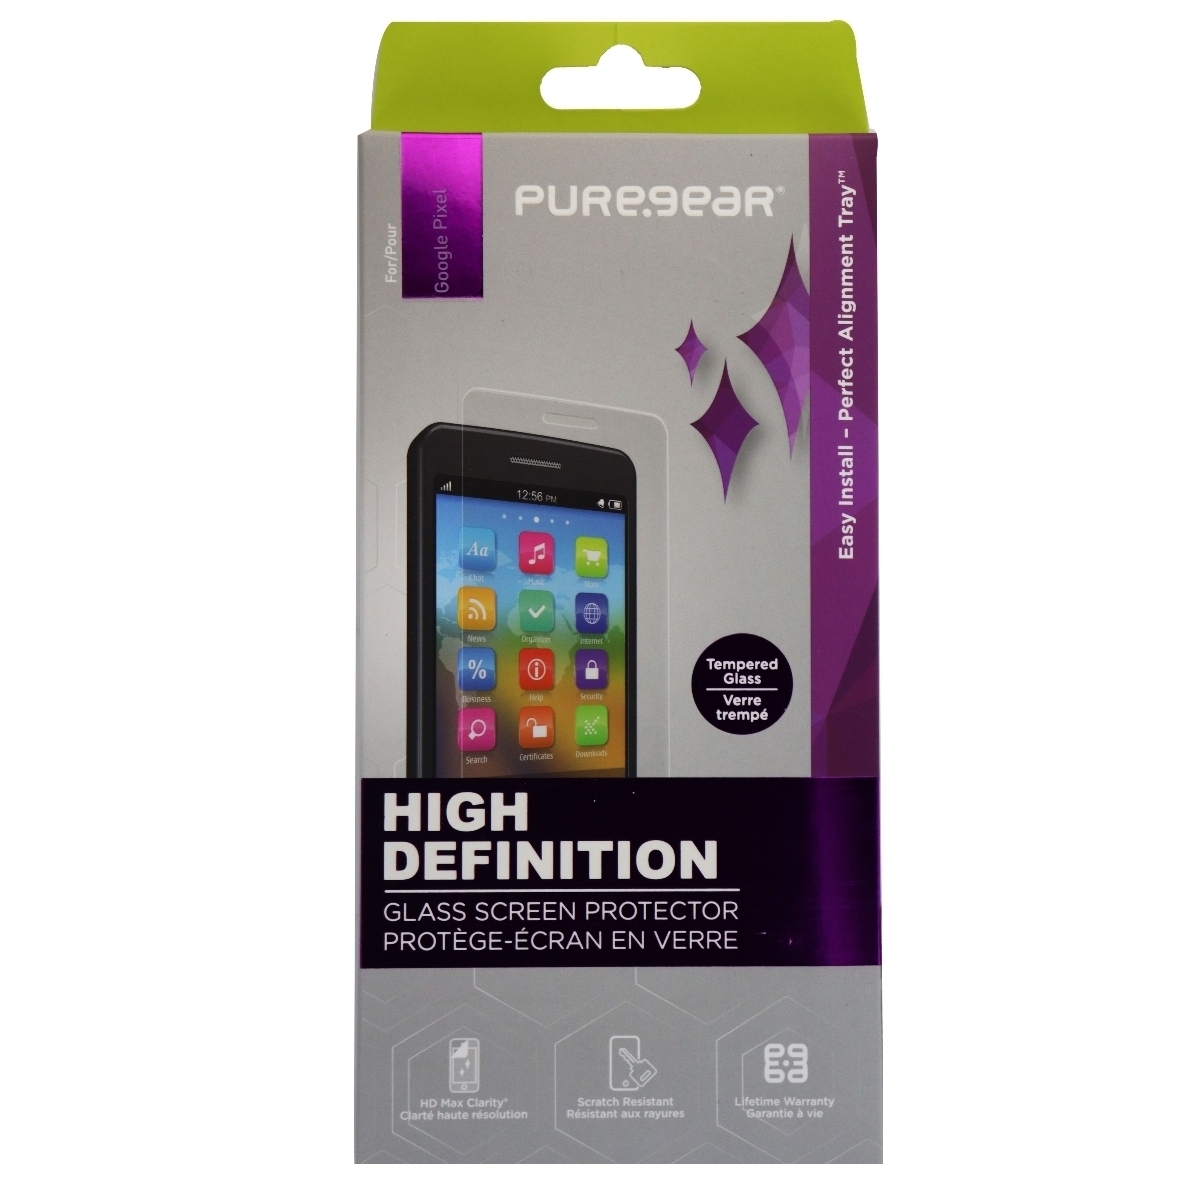 PureGear HD Tempered Glass Screen Protector For Google Pixel XL - Clear